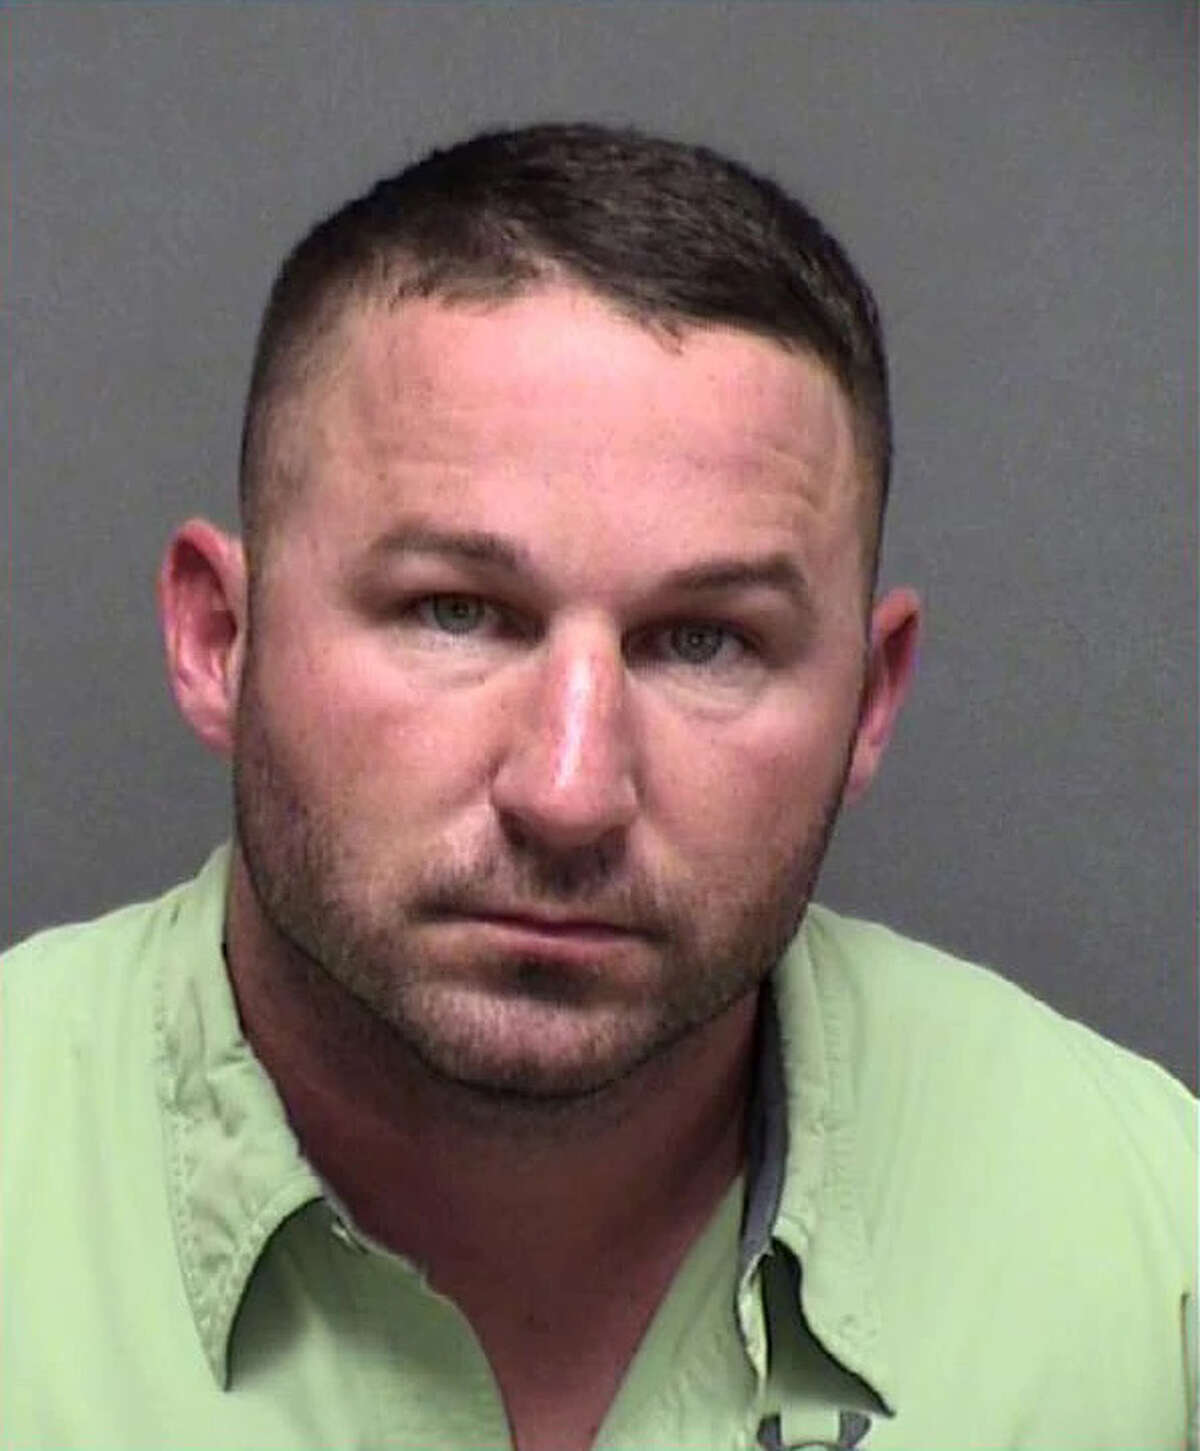 San Antonio Police Officer Austin Wilke, 33, was arrested and charged with assaulting his spouse on Jan. 17. The victim said he pushed them on the floor, causing scrapes and abrasions.